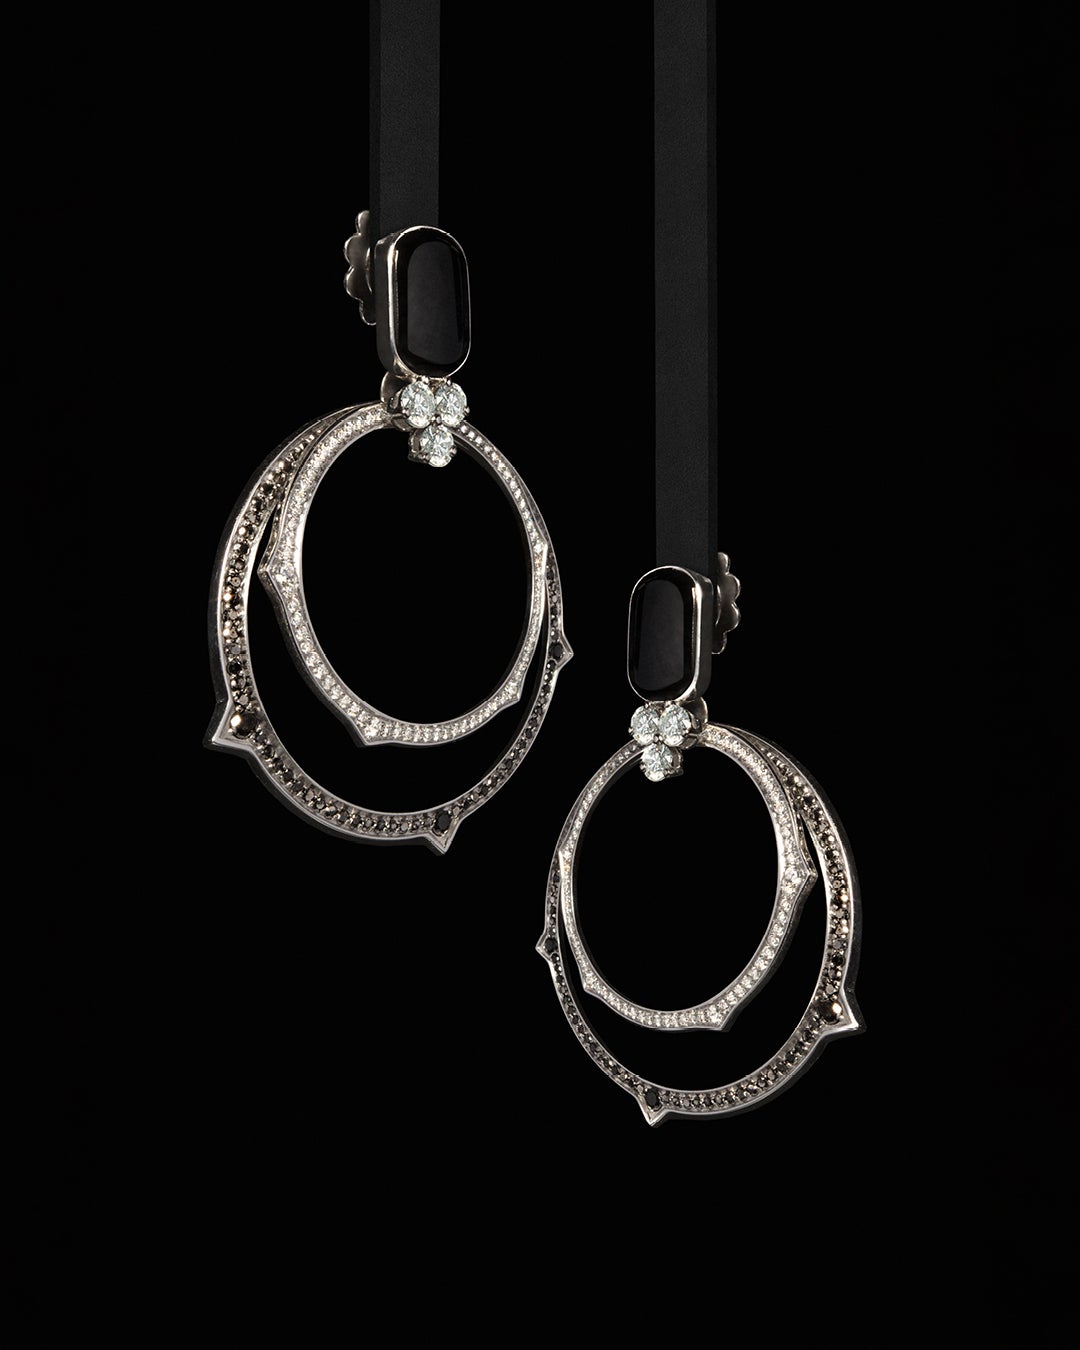 Interchangeable earrings in 18k white gold, 1,88 ct. white diamonds, black diamonds and onyx

EVE_R COLLECTION
The edgy and modern colors of turquoise, onyx and coral give life to Eve_r. The new collection is inspired by the iconic and